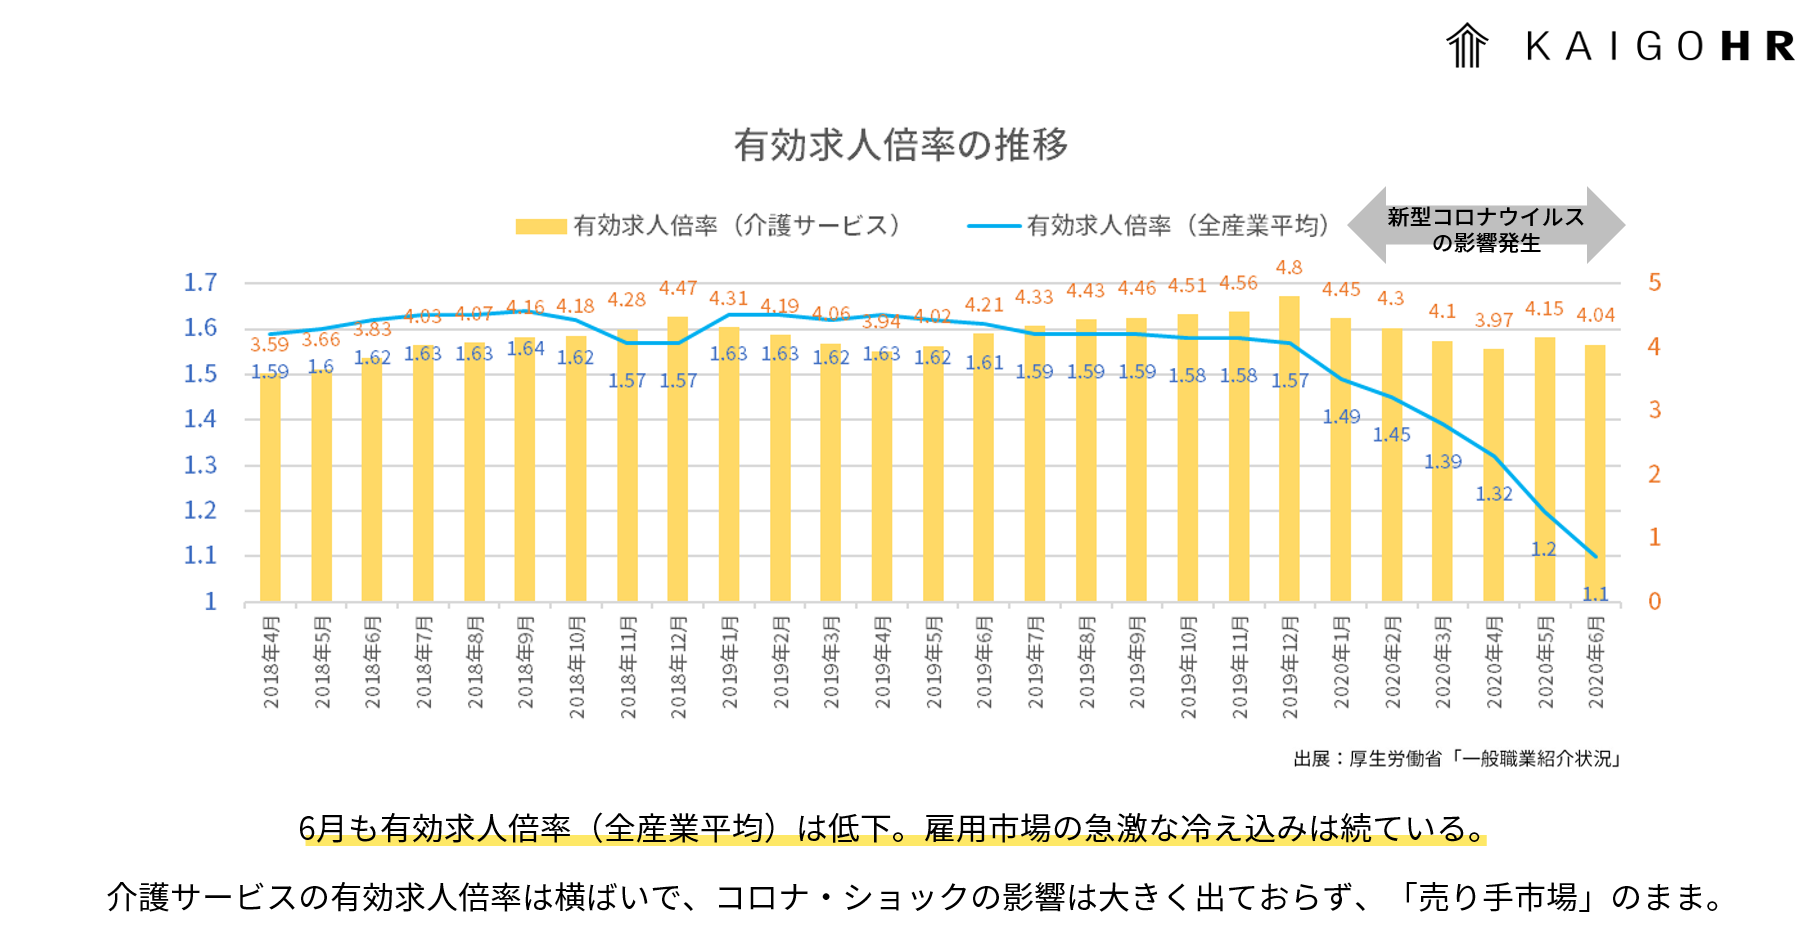 hr-data2006-04.PNG